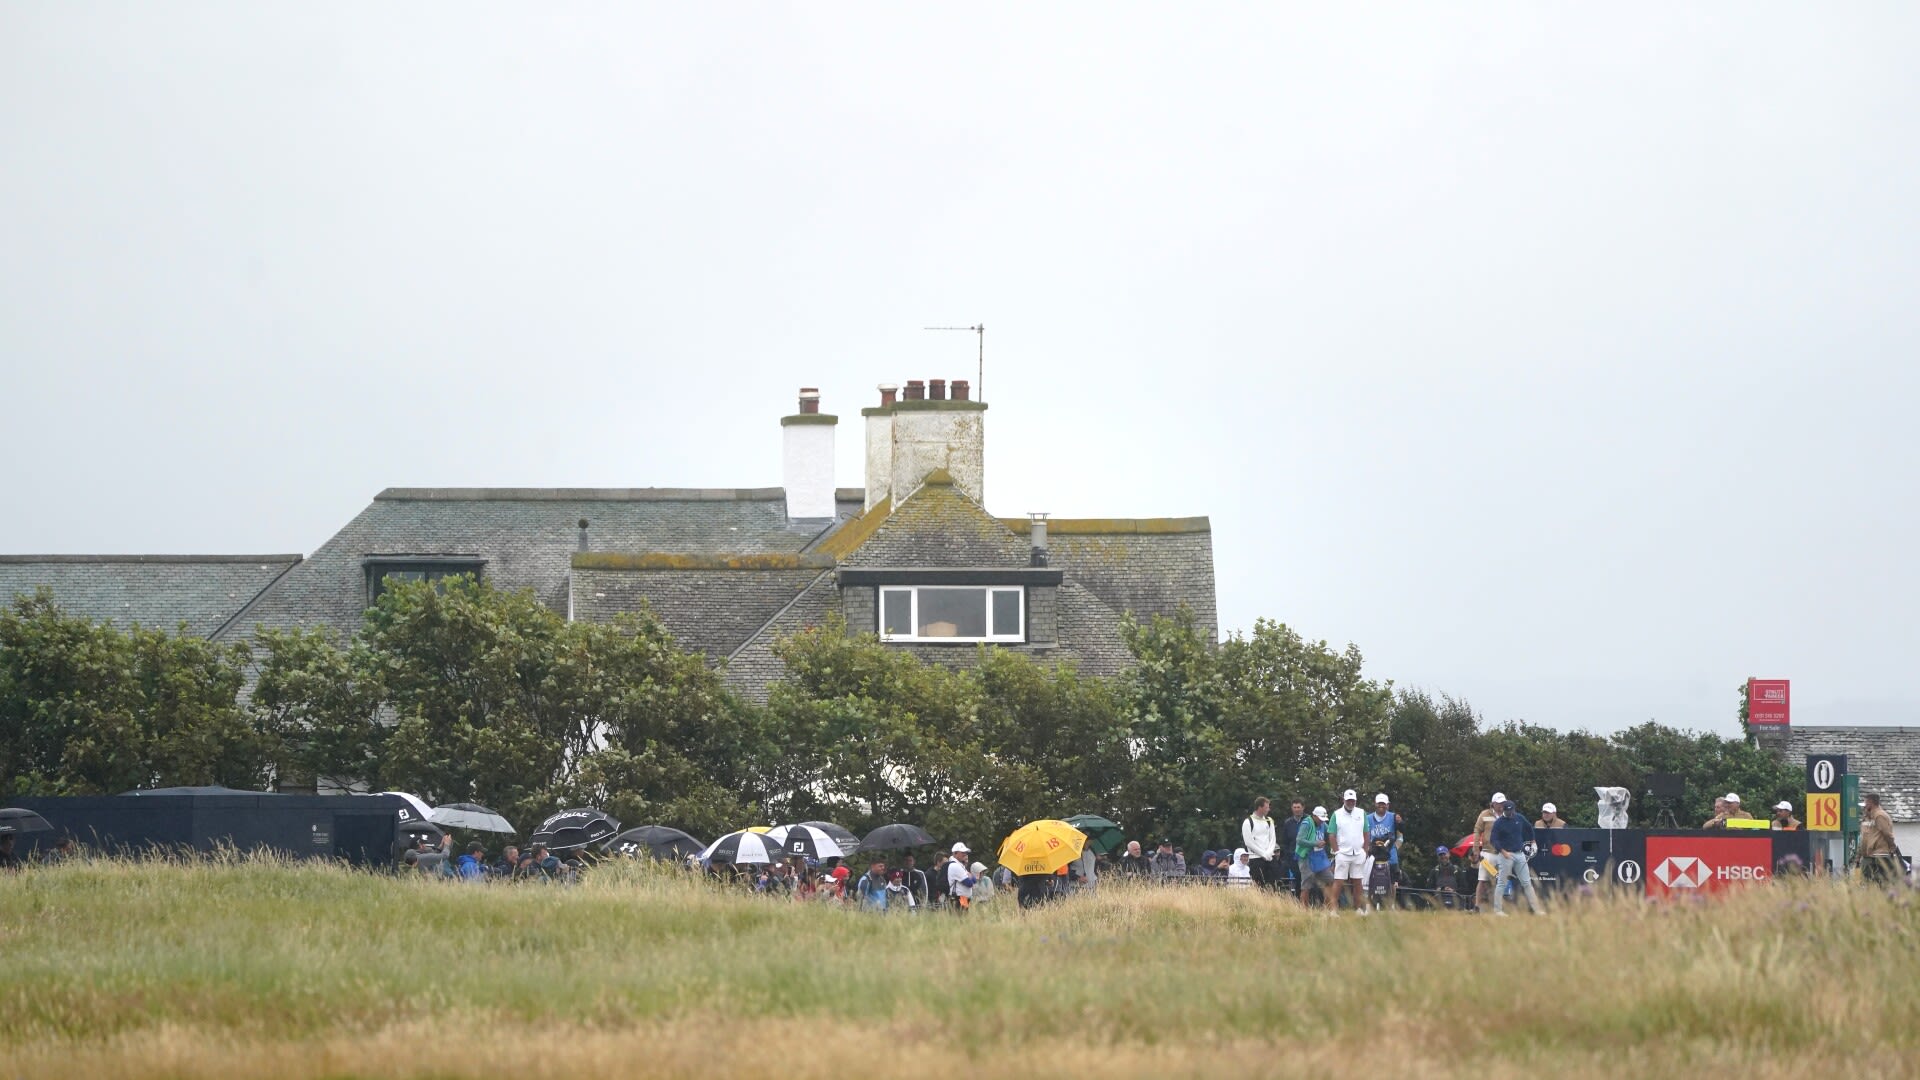 Sitting in the middle of Royal Troon, a house is up for sale